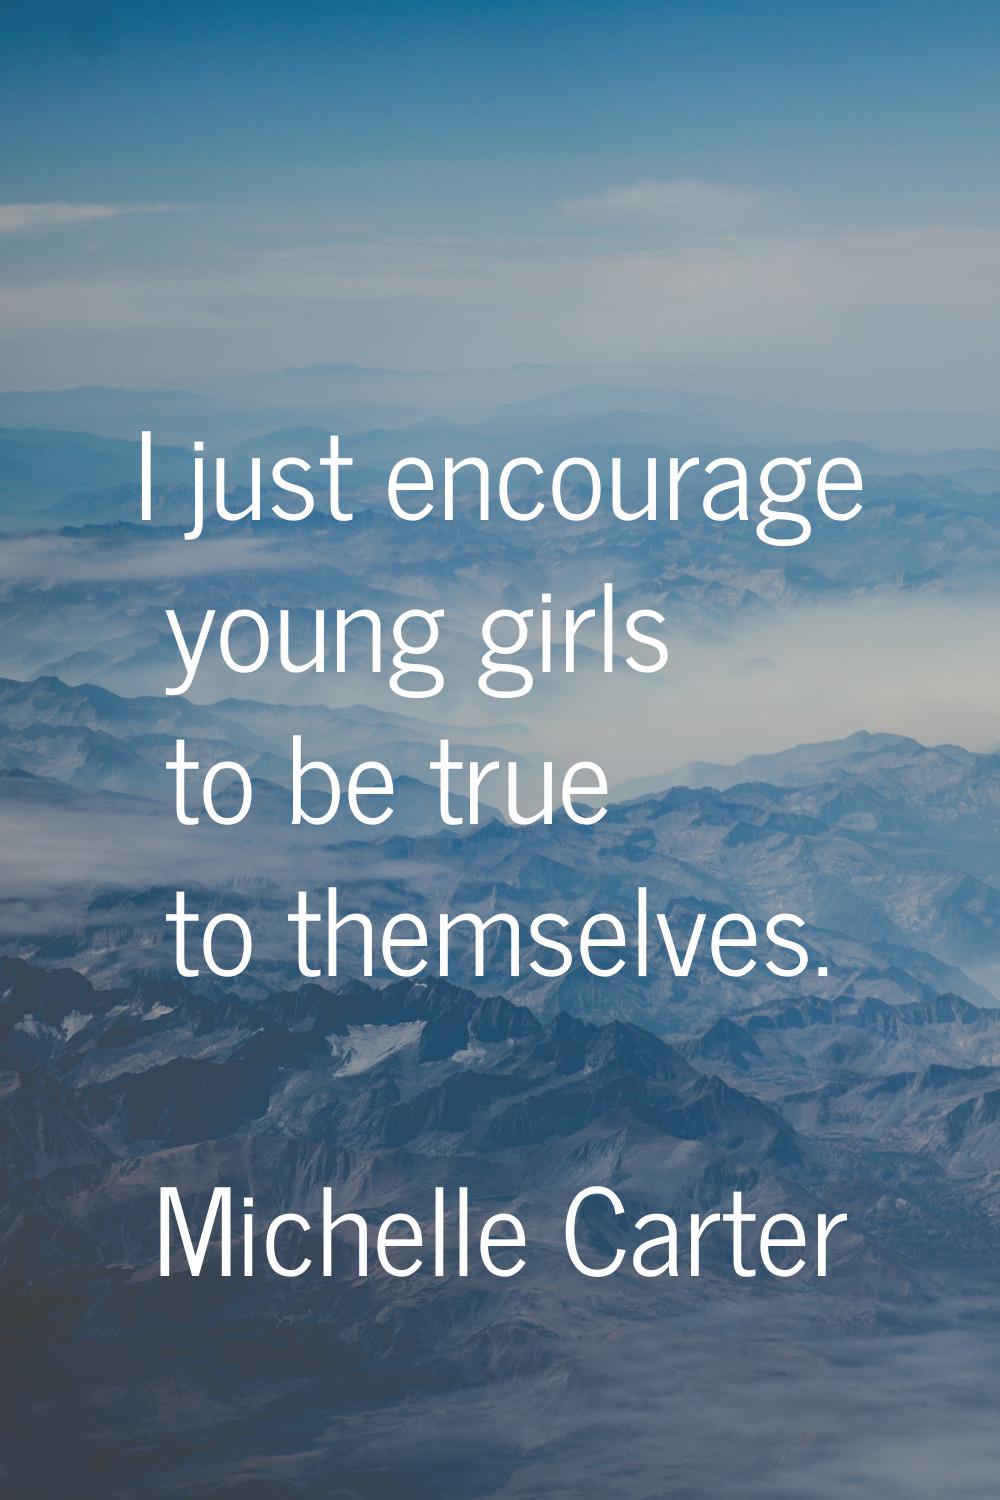 I just encourage young girls to be true to themselves.